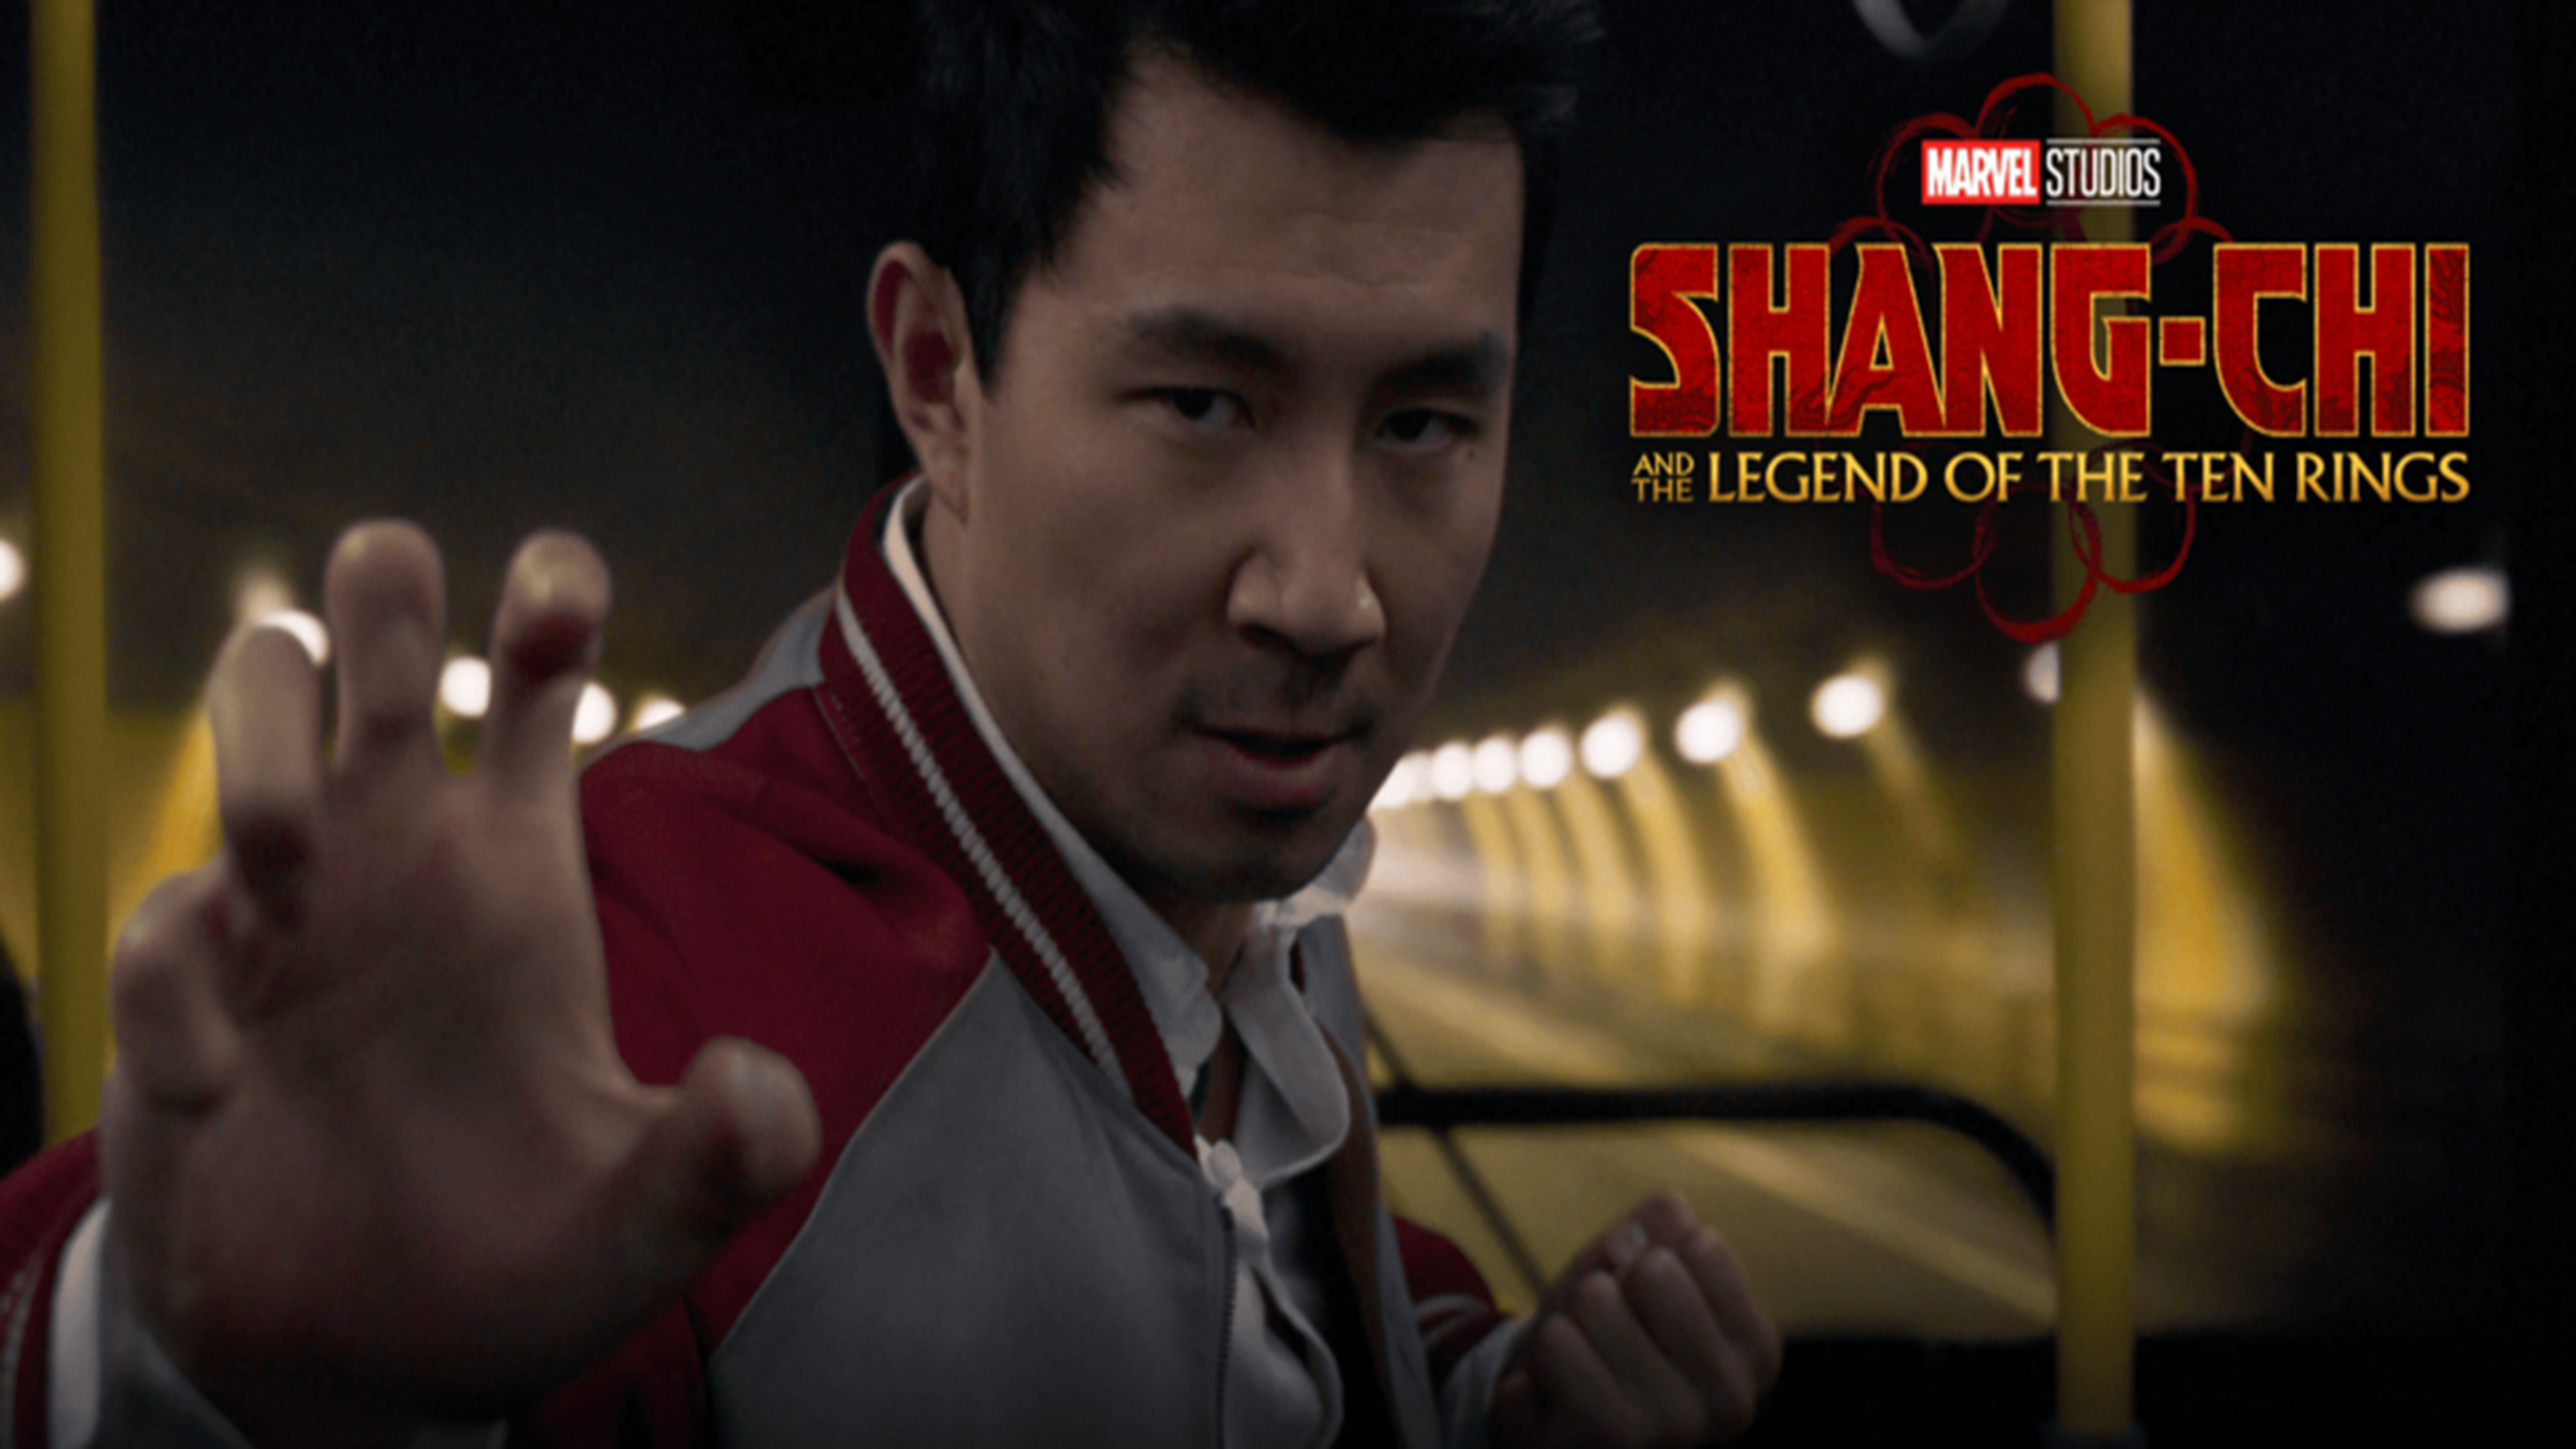 Shang-Chi and the Legend of Ten Rings breaks records and Asian representation photo from Marvel